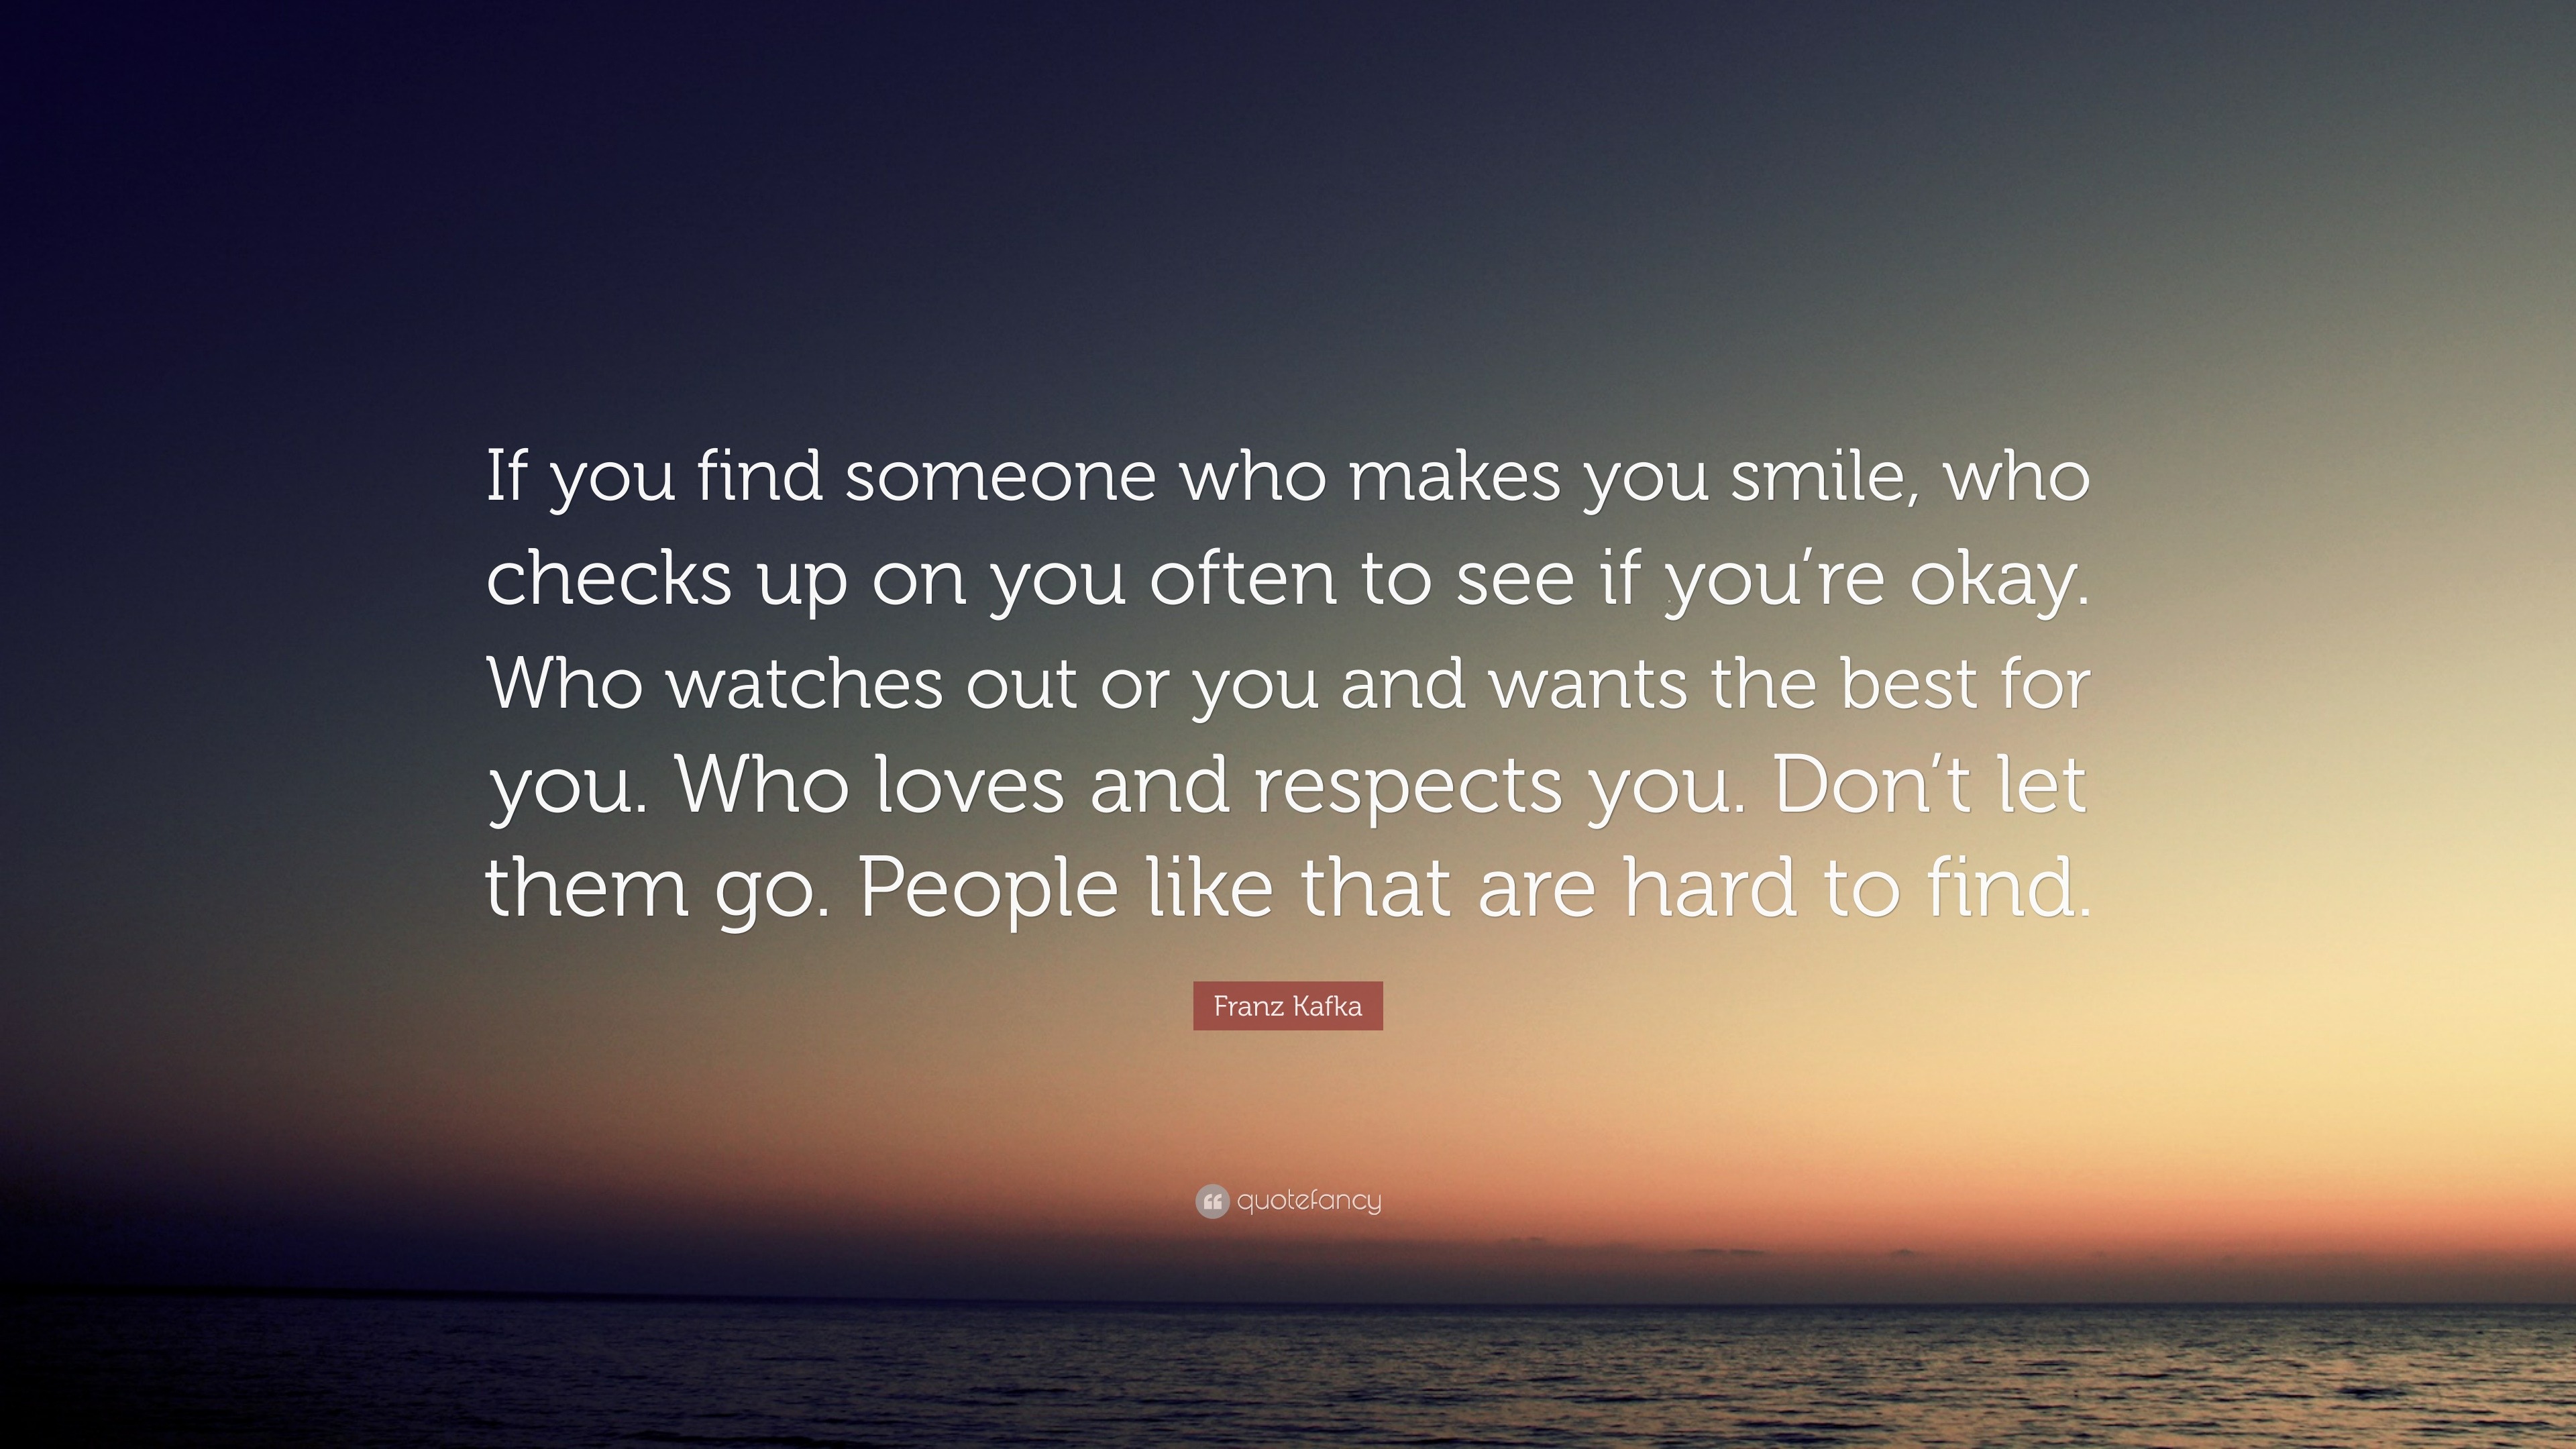 Franz Kafka Quote “If you find someone who makes you smile who checks